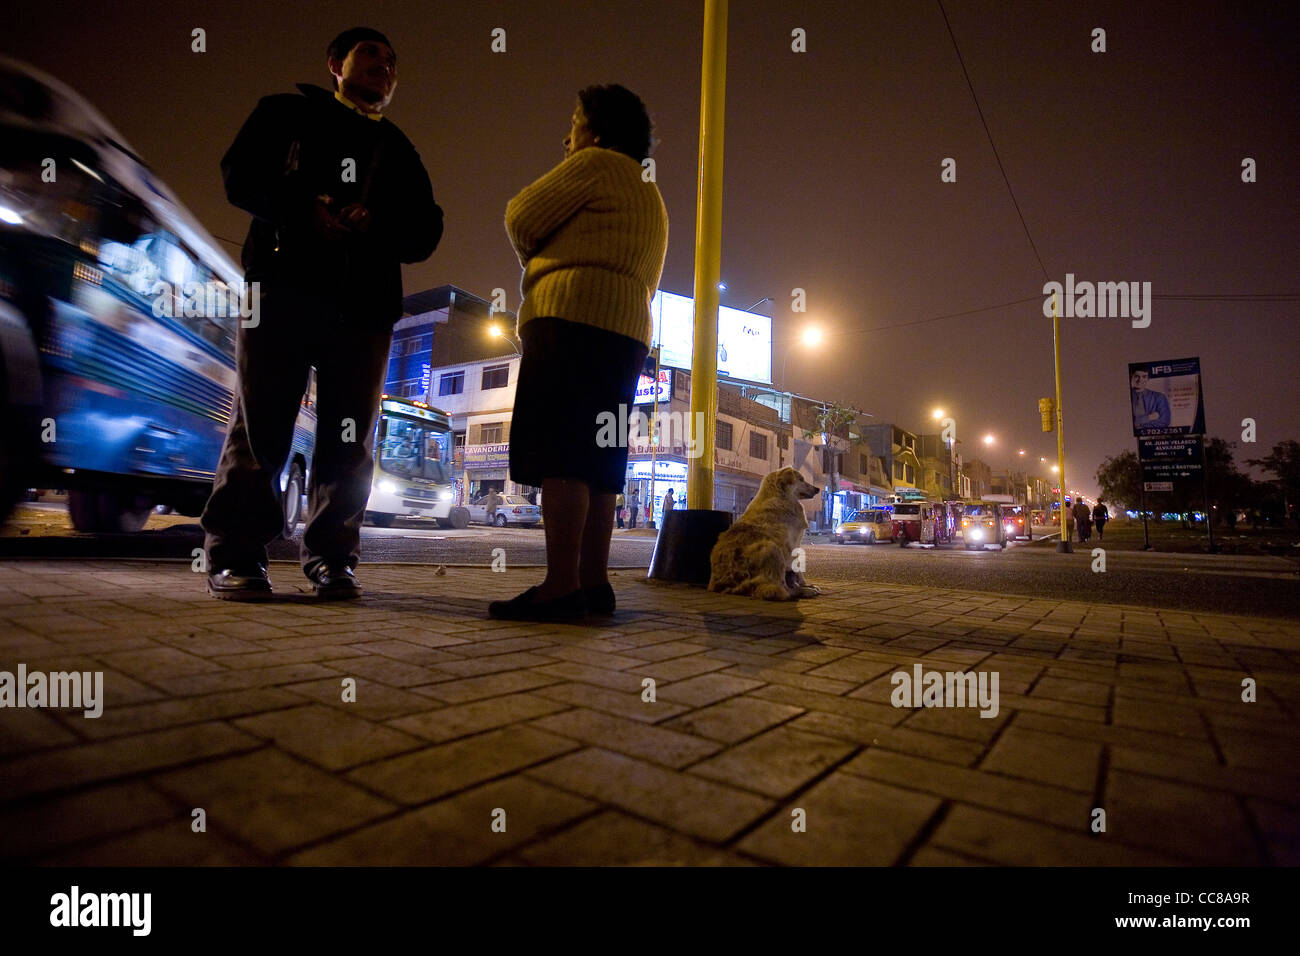 People chat on a busy street corner in Villa el Salvador, in Lima, Peru, South America. Stock Photo